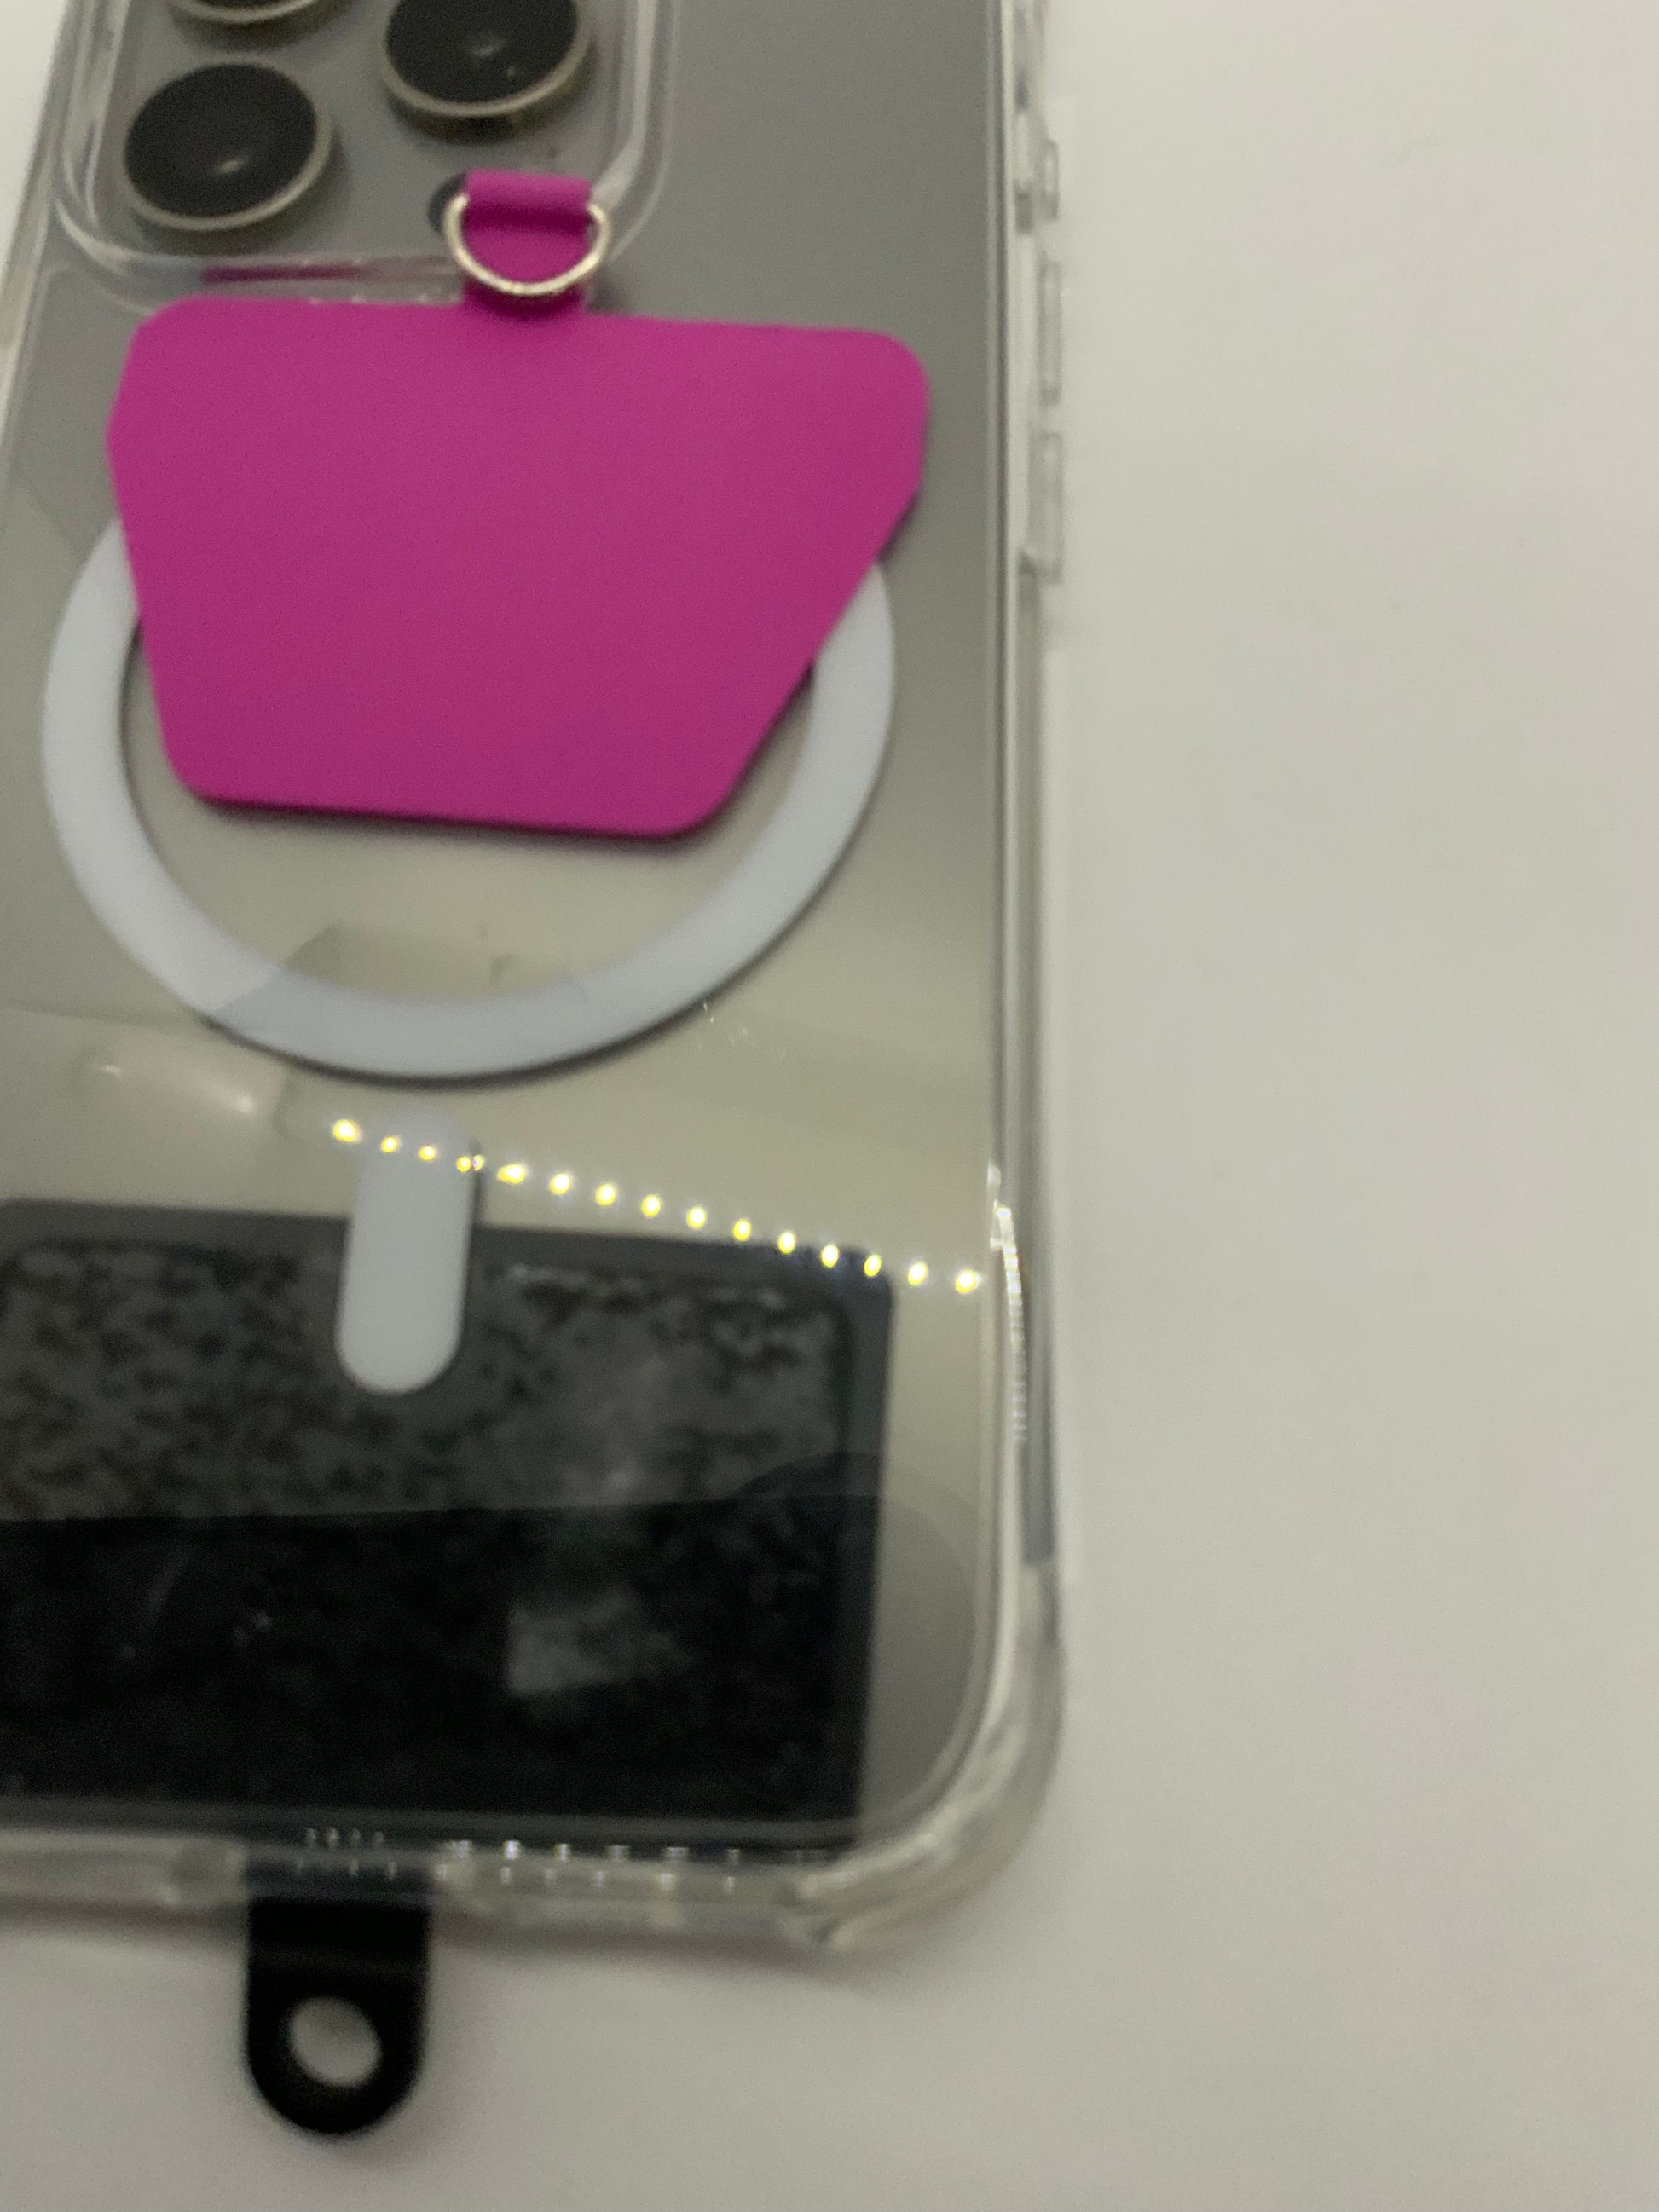 The picture shows a close-up of a few objects on a white surface. There is a bright pink, flat object with a small golden ring attached to the top. Below it, there is a white circular ring. To the left, there are four black circular objects in a transparent packaging. Below the white ring, there is a rectangular object with a black and grey pattern, which is also in transparent packaging. The image is slightly blurred.